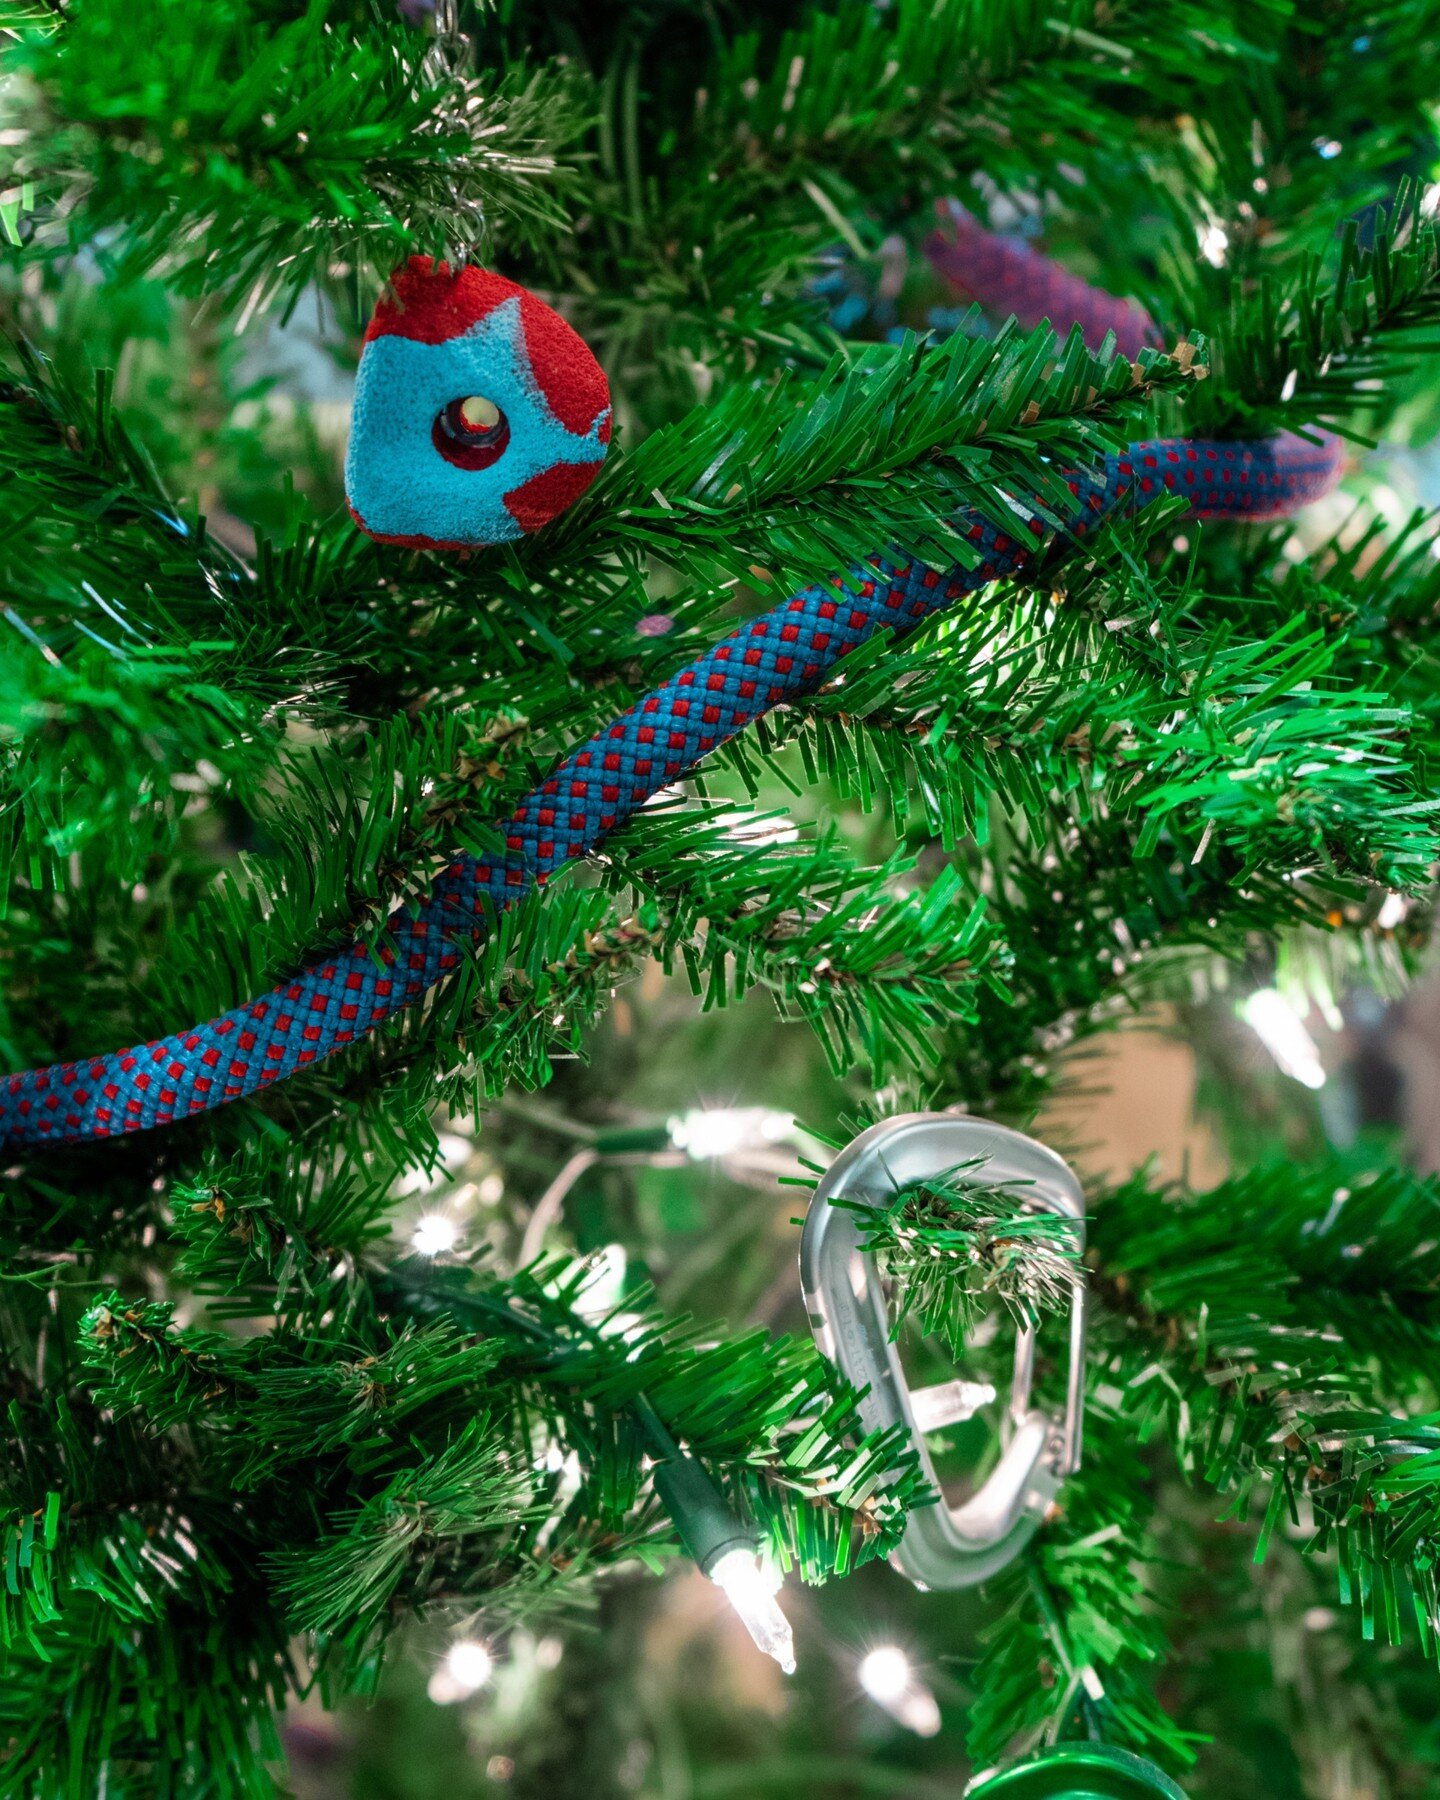 🎄Happy Holidays and a Merry Peakmas!🎄

Starting today, we're celebrating the 12 days of Peakmas the only way we know how&ndash; 20% OFF deals on one item, every day, for 12 days! 

🔹Day 1: Carabiners
🔹Day 2: Chalk
🔹Day 3: Rhino Skin
🔹Day 4: Pea